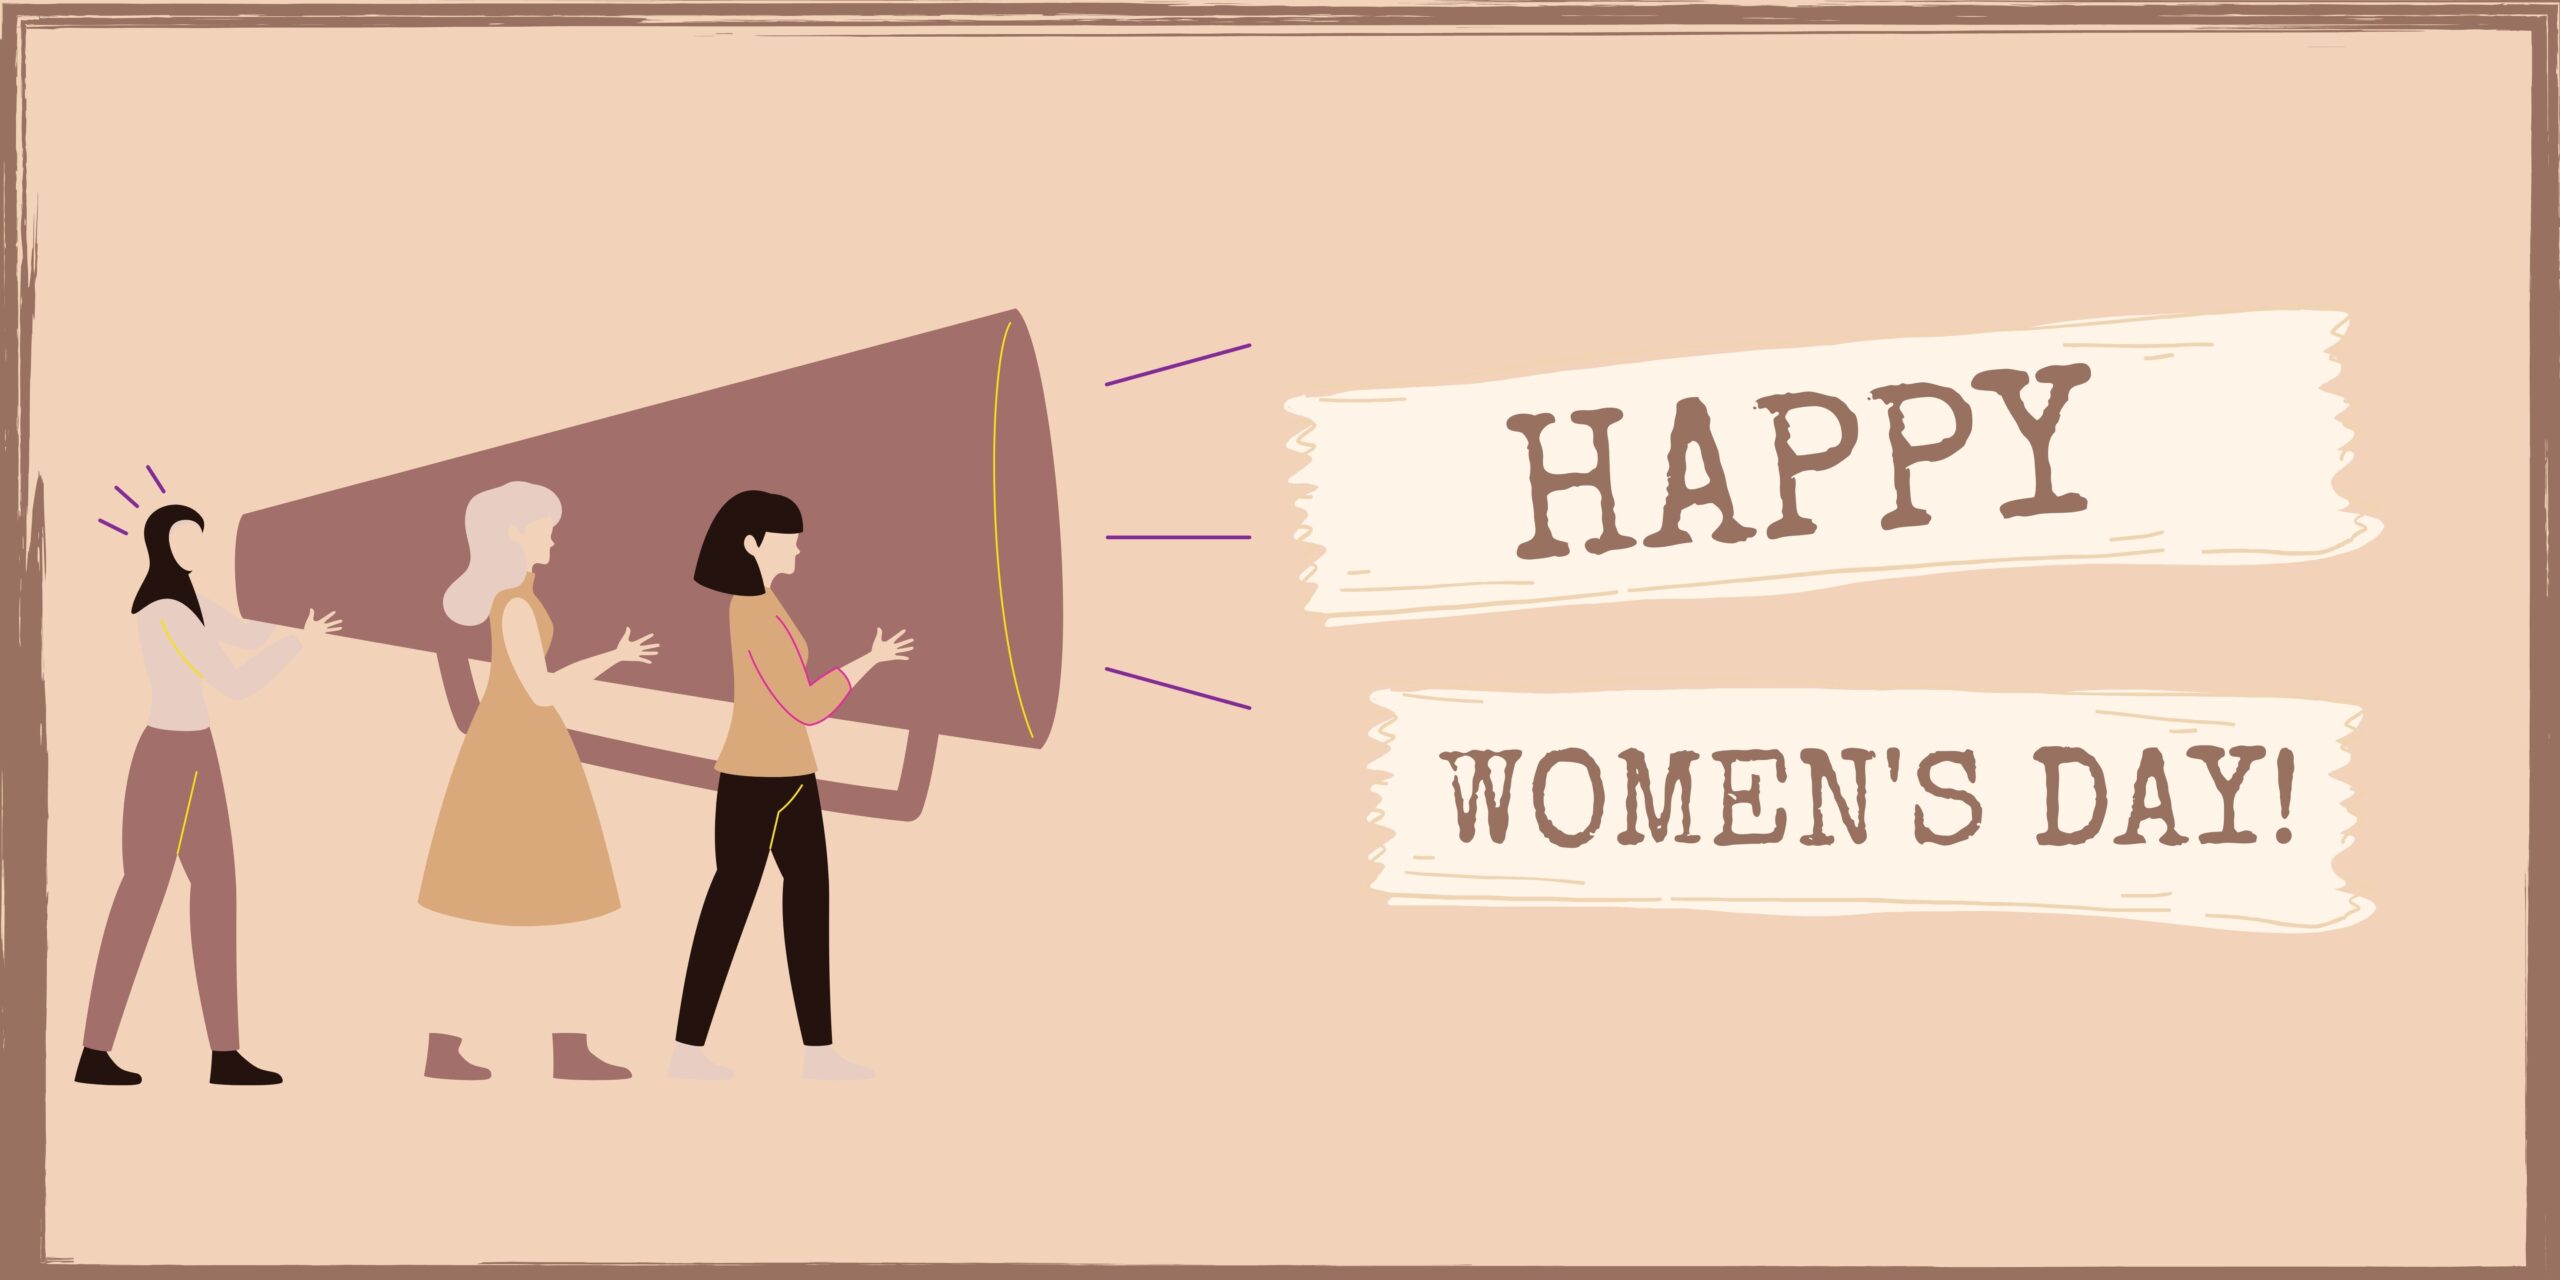 How much do you know about Women’s Day?